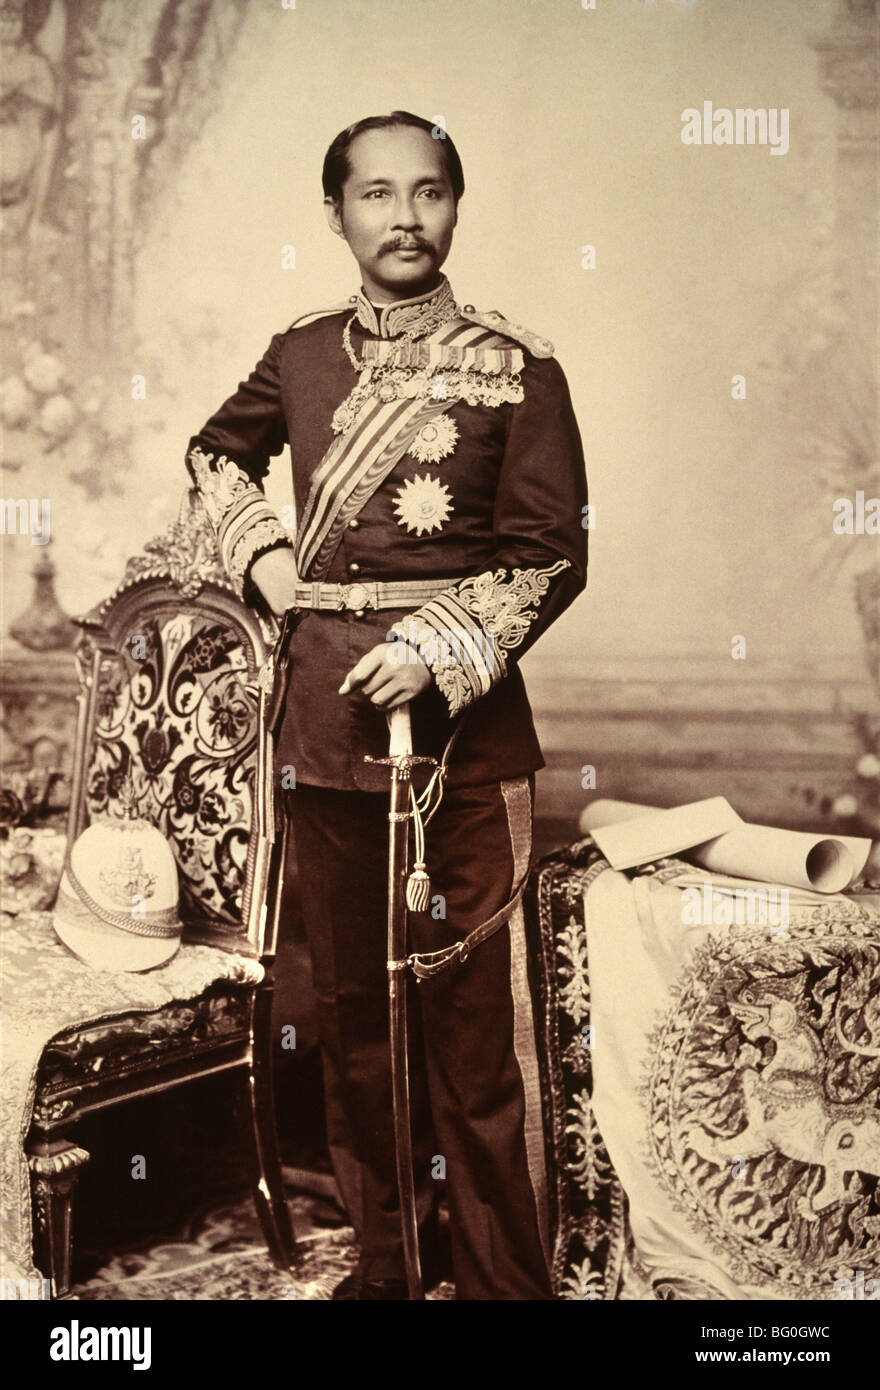 King Chulalongkorn (Rama V), fifth king of the Chakri dynasty of Thailand, lived between 1853 and 1910, Thailand, Asia Stock Photo